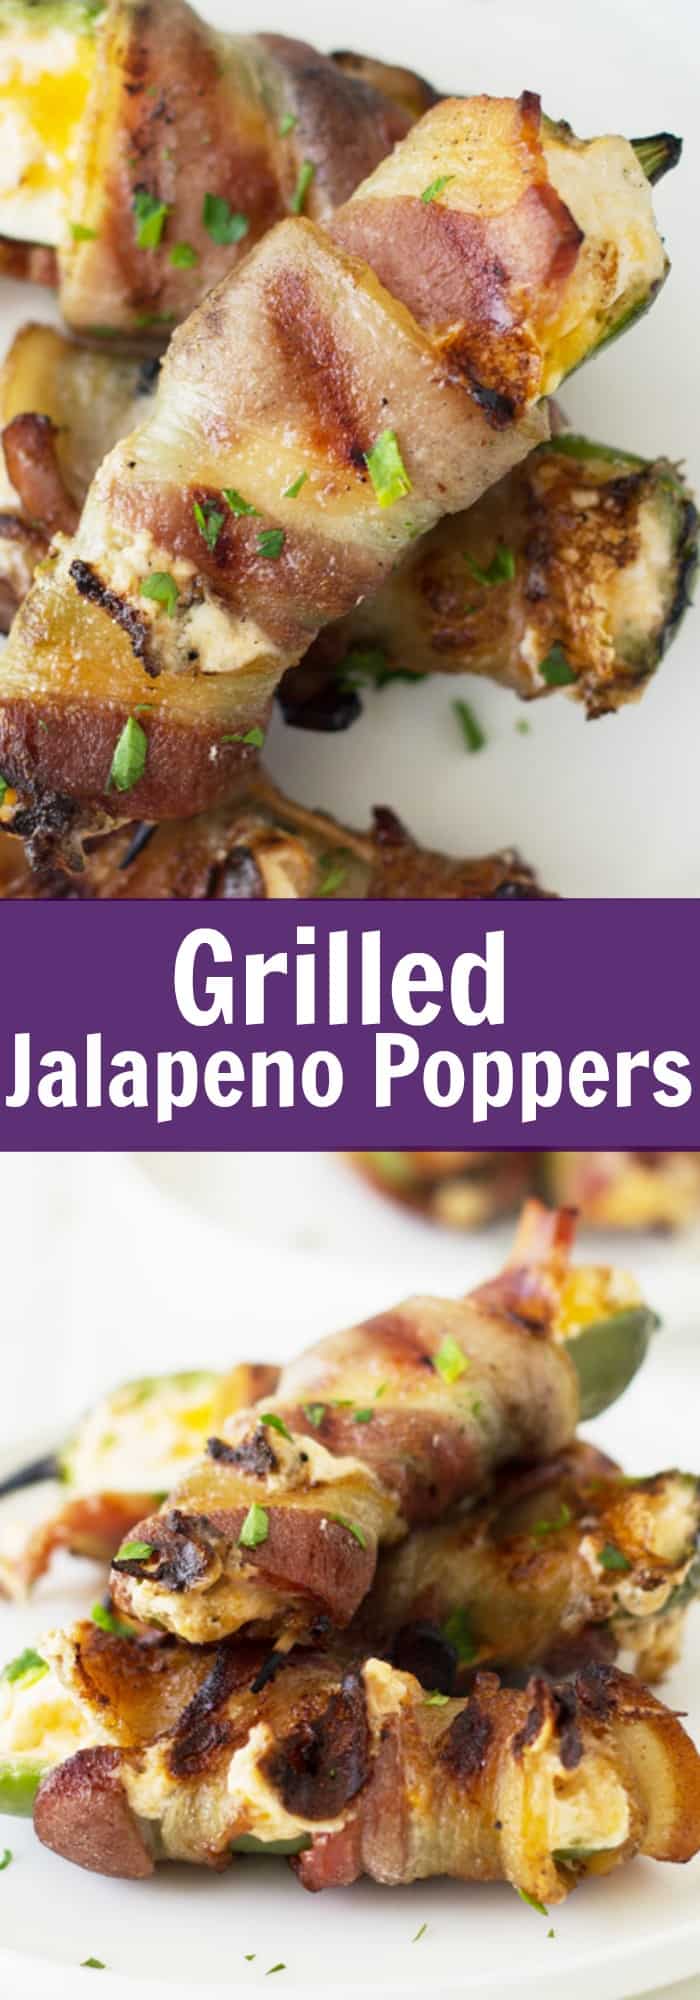 Grilled Jalapeno Poppers filled with a creamy cheese mixture, wrapped in smokey bacon, then grilled until the cheese becomes nice and gooey